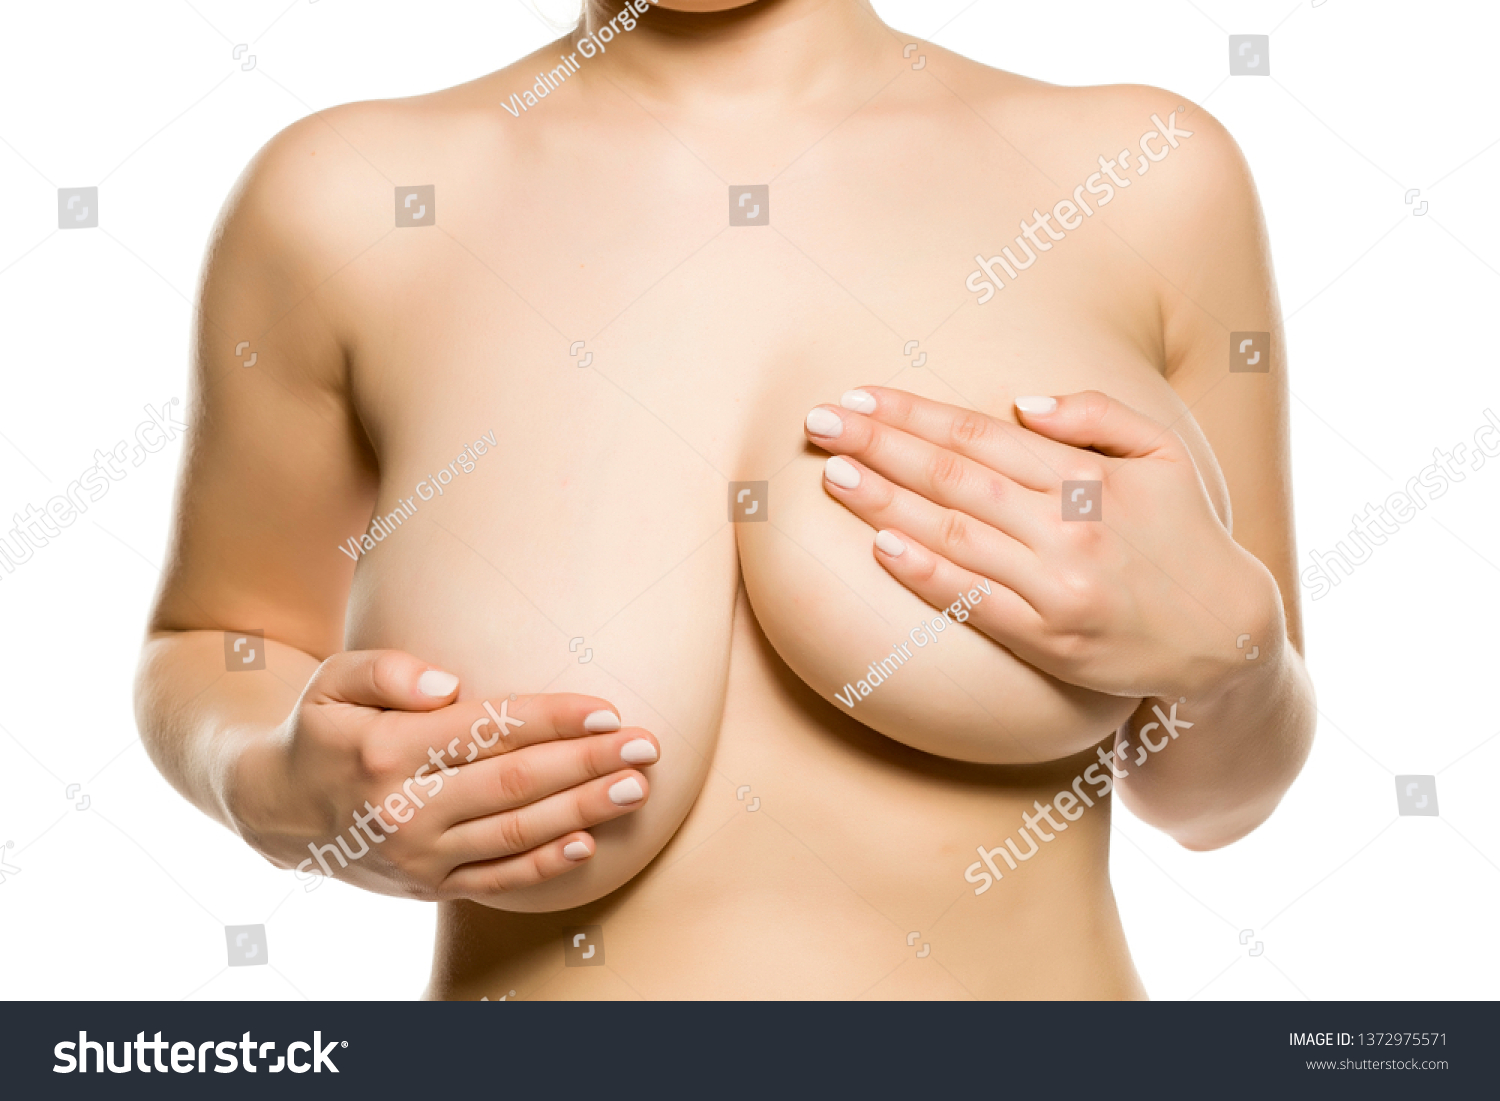 Big Breasts Pictures